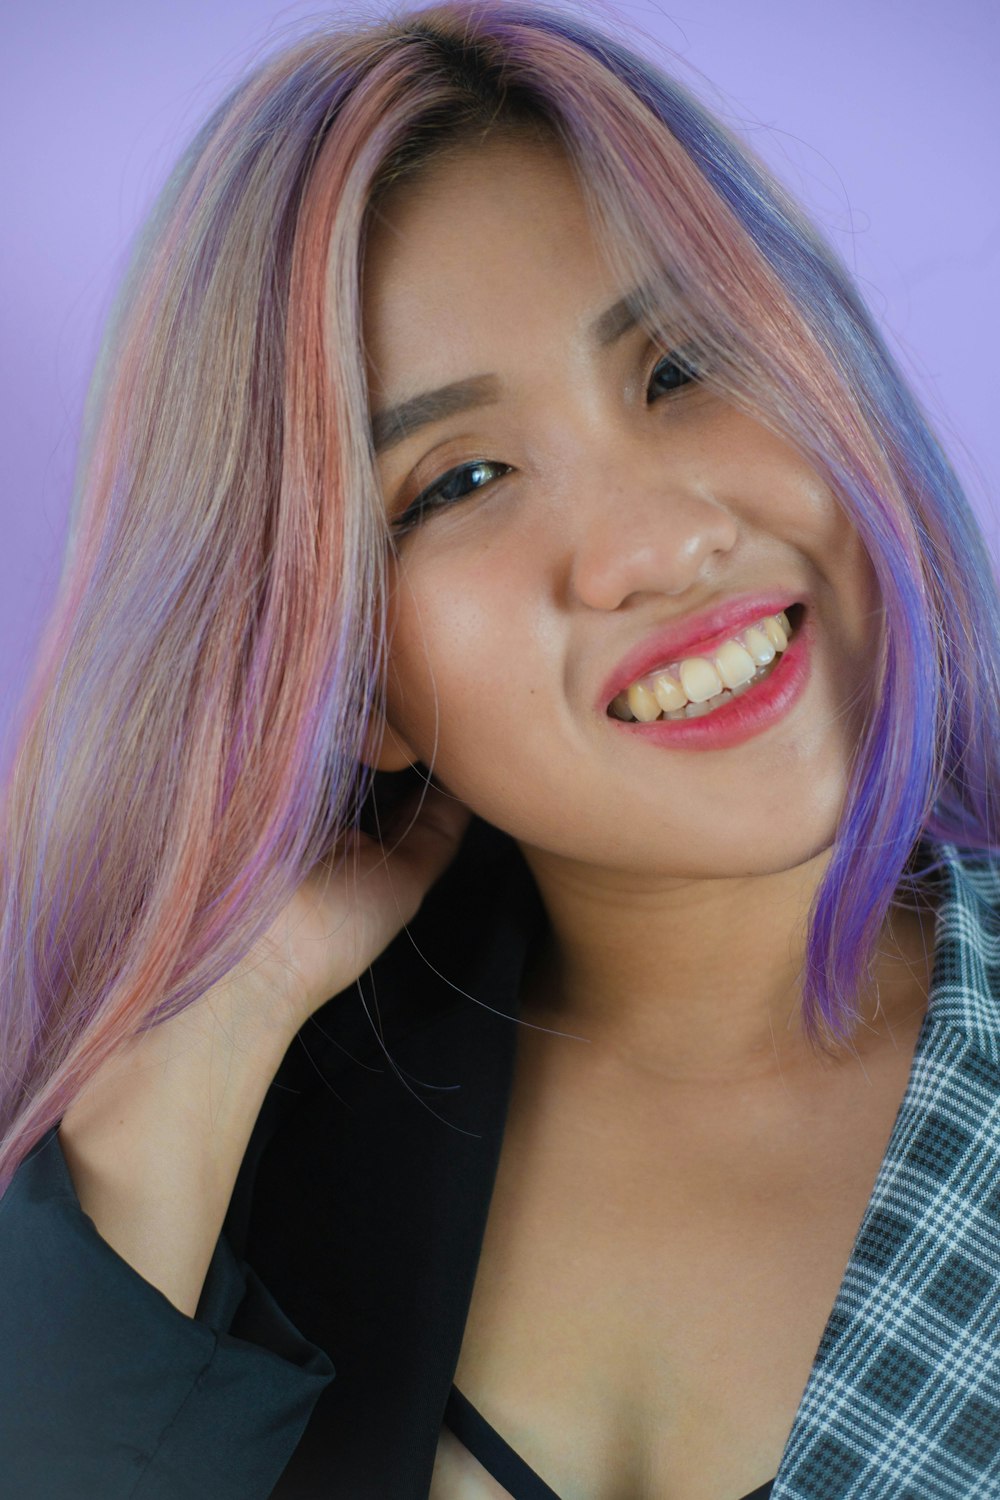 a woman with pink and blue hair smiling